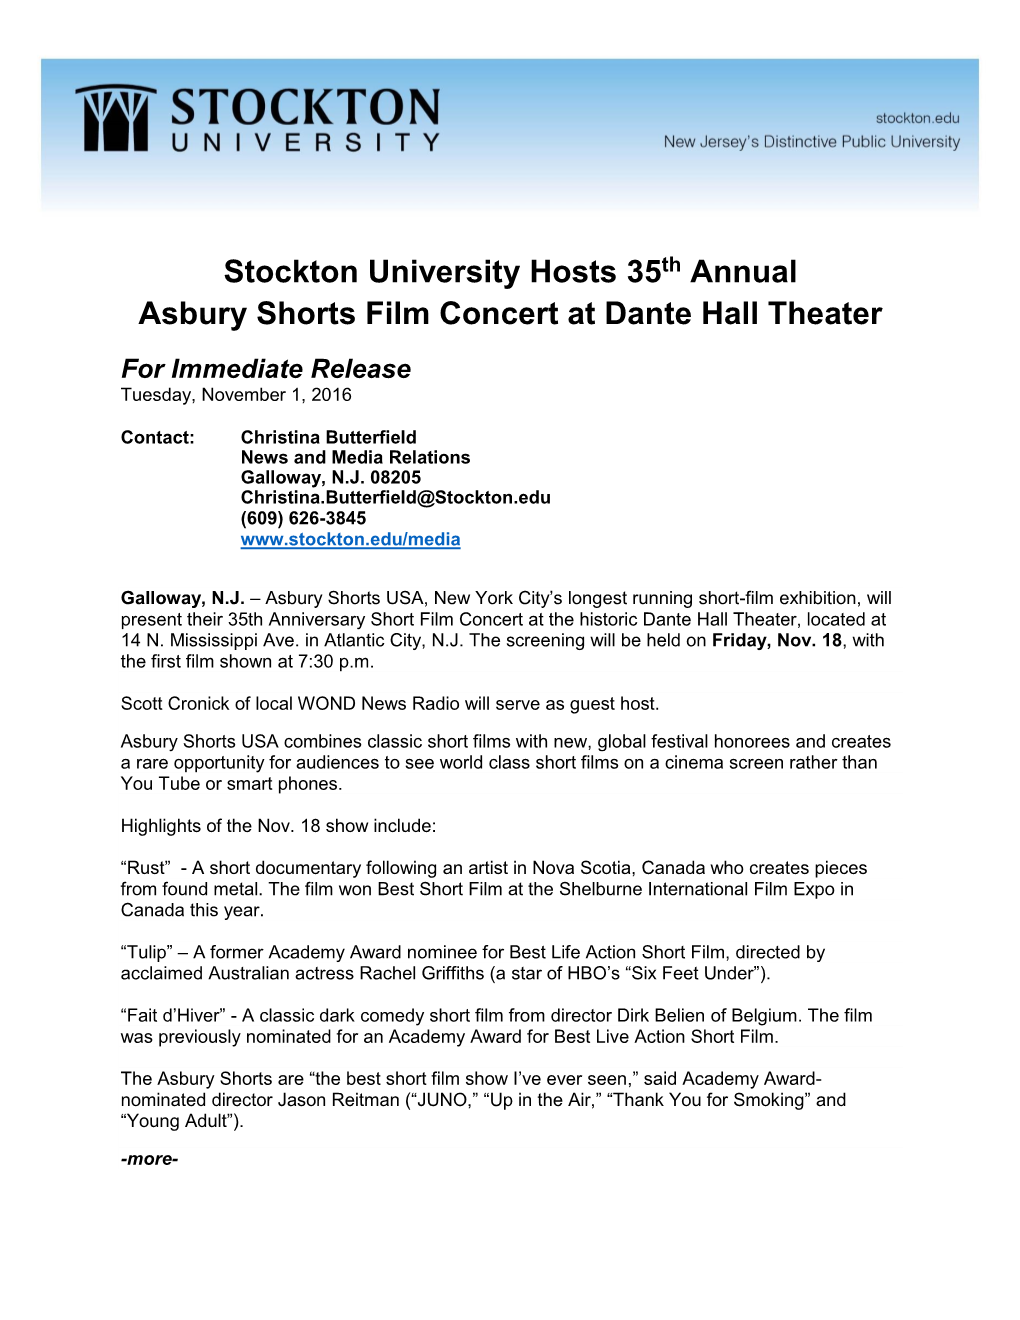 Stockton University Hosts 35Th Annual Asbury Shorts Film Concert at Dante Hall Theater for Immediate Release Tuesday, November 1, 2016